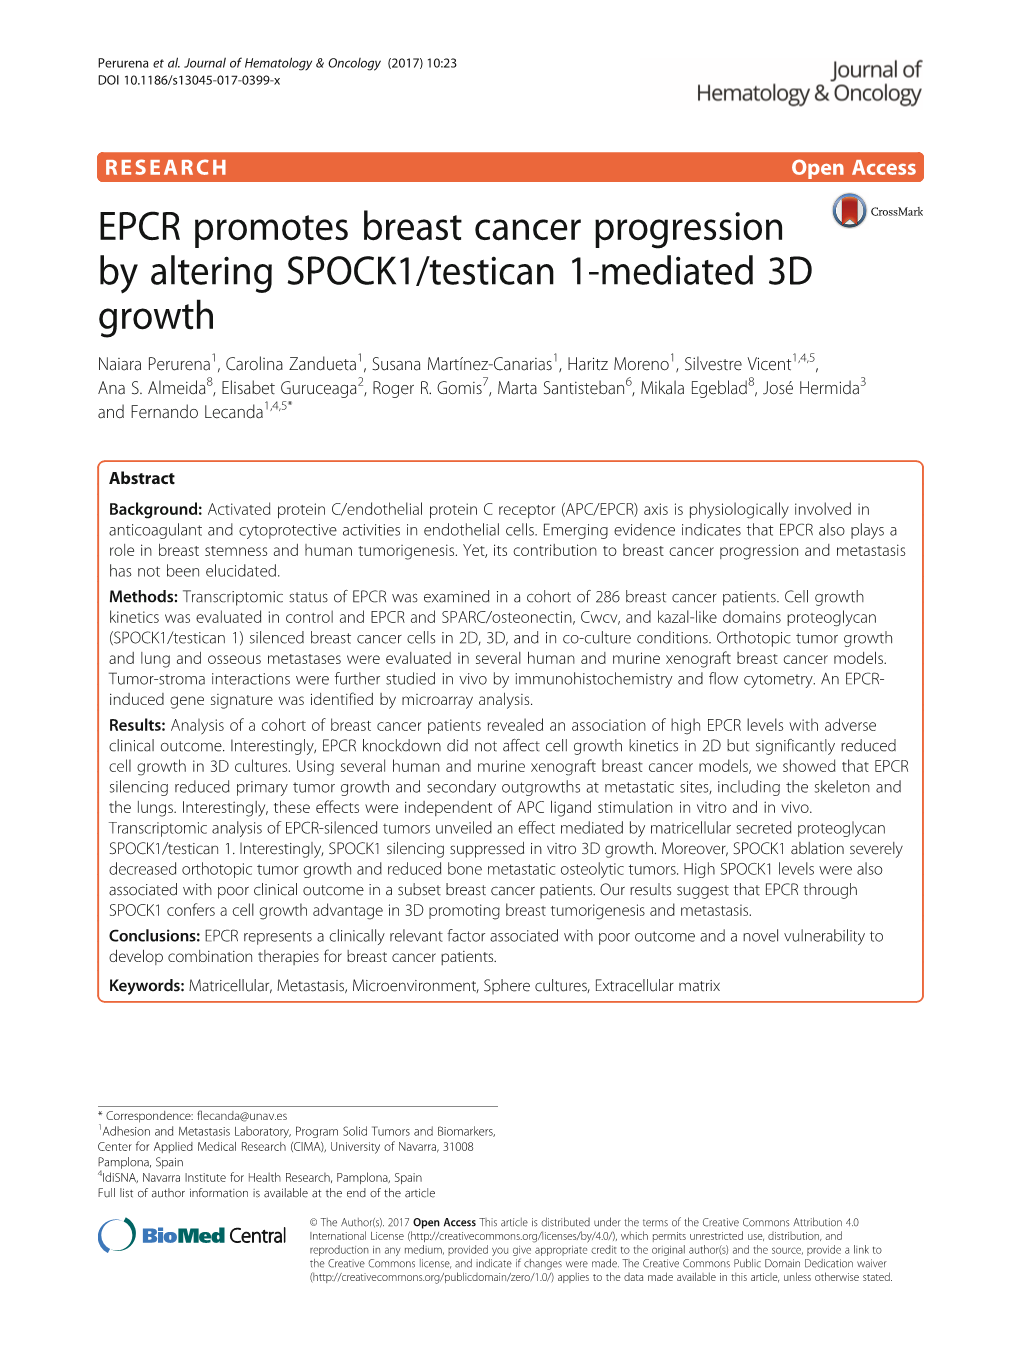 EPCR Promotes Breast Cancer Progression by Altering SPOCK1